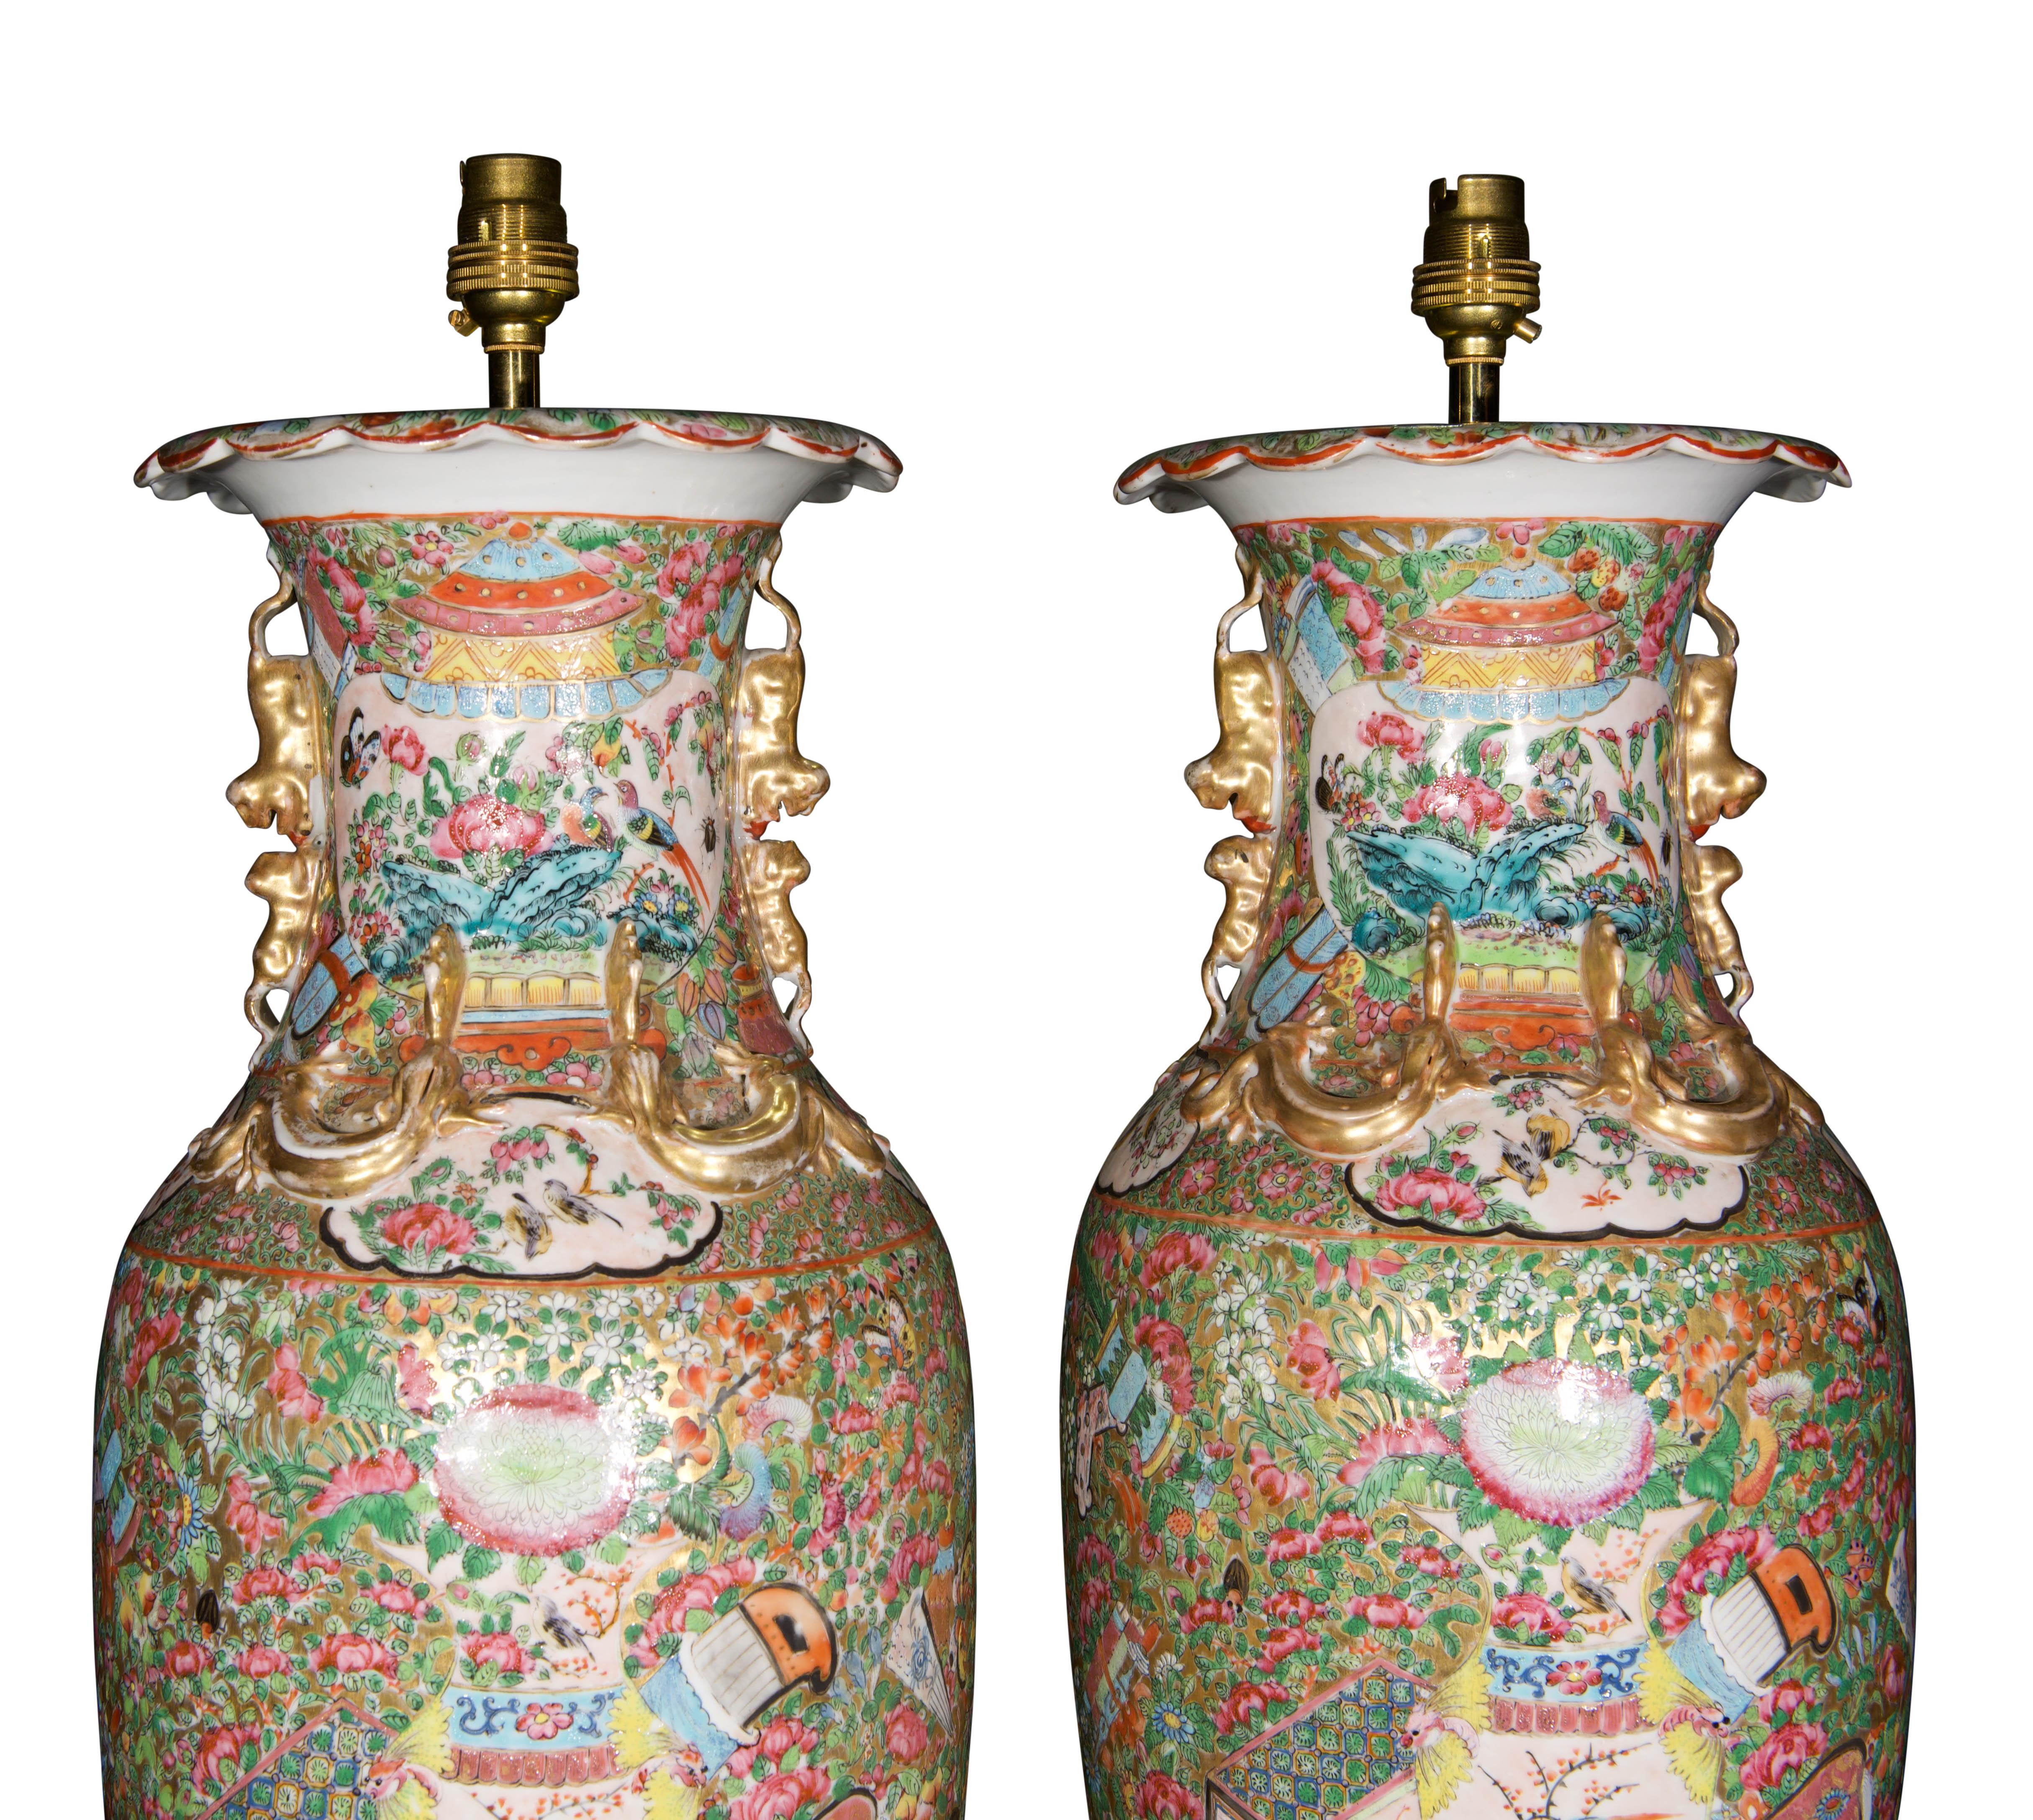 Glazed Pair of 19th Century Chinese Canton Baluster Porcelain Antique Table Lamps